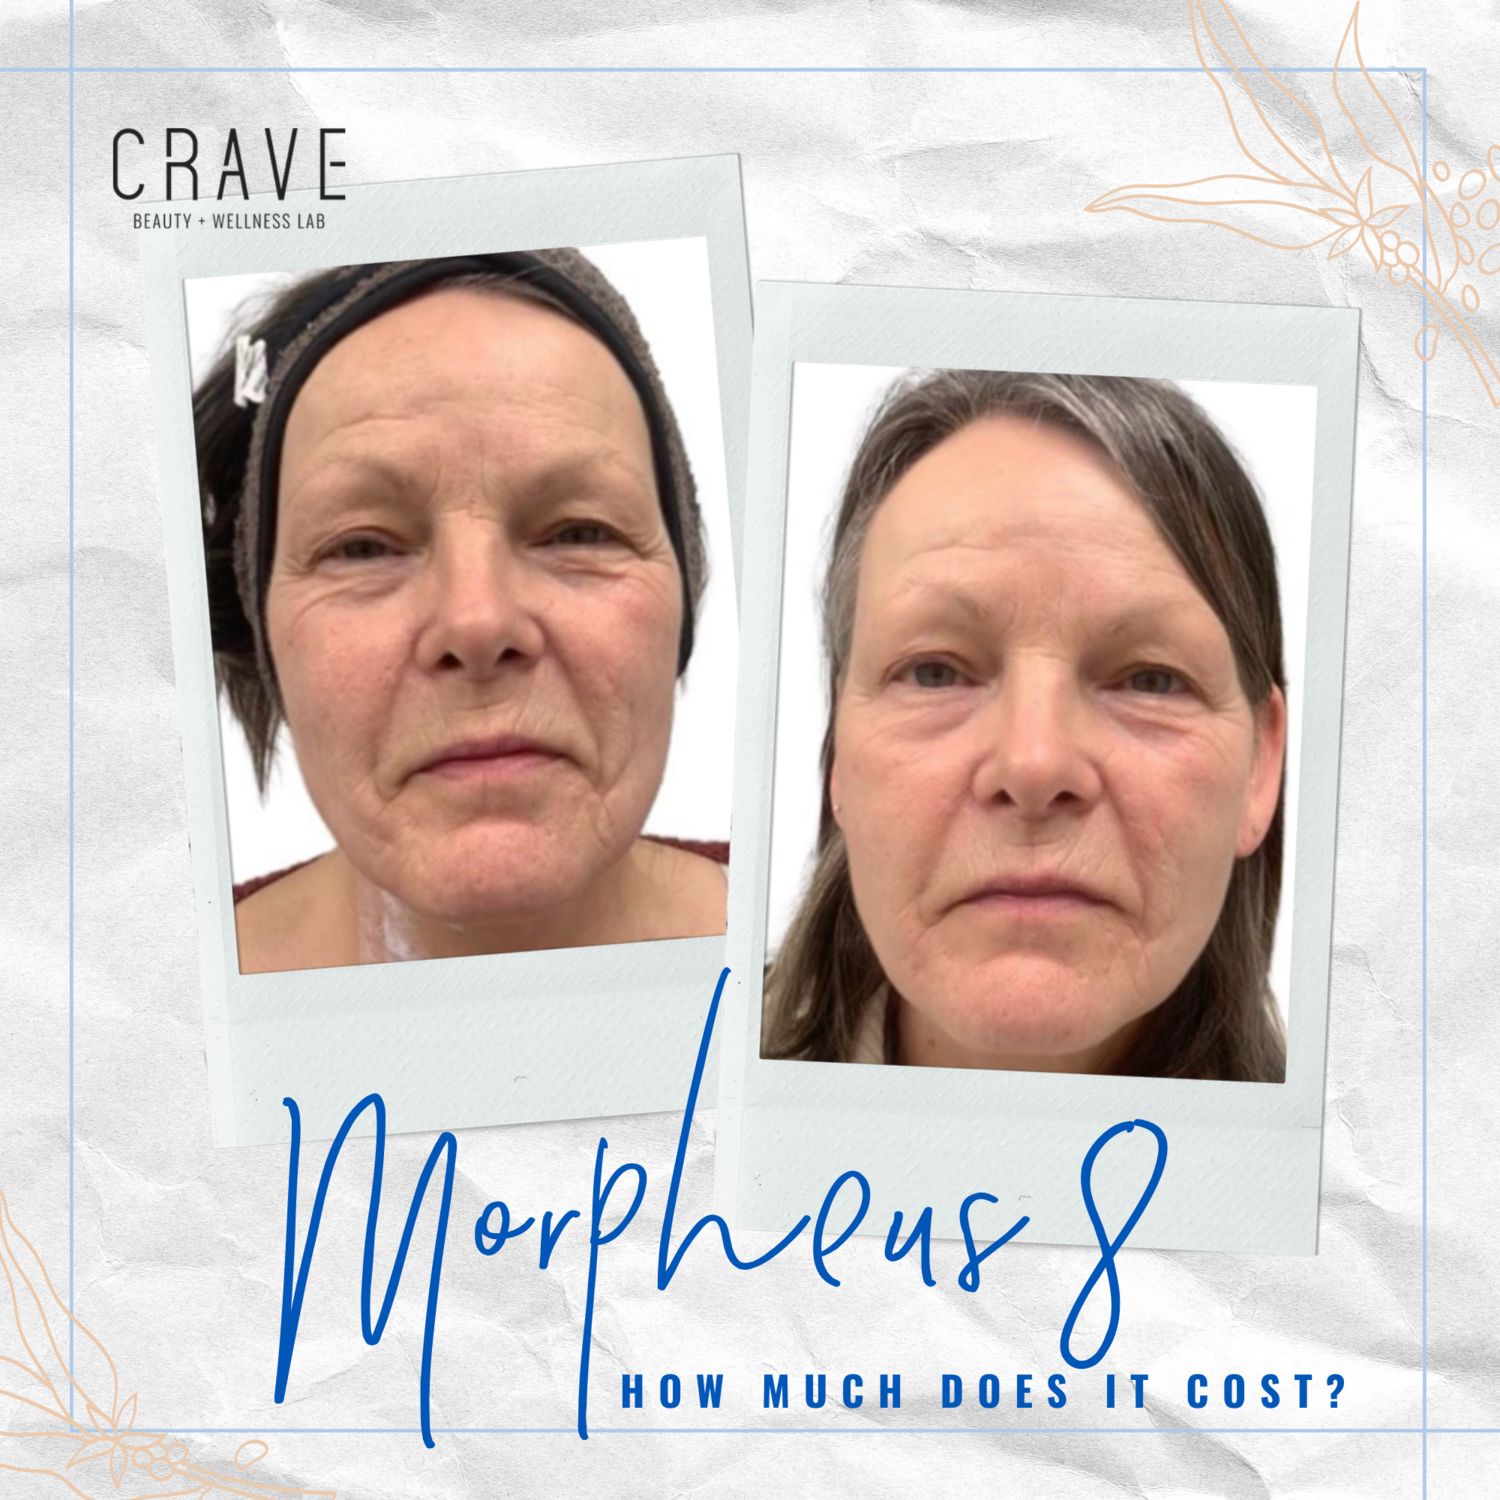 How Much Does Morpheus8 Treatment Cost? — CRAVE BEAUTY LAB